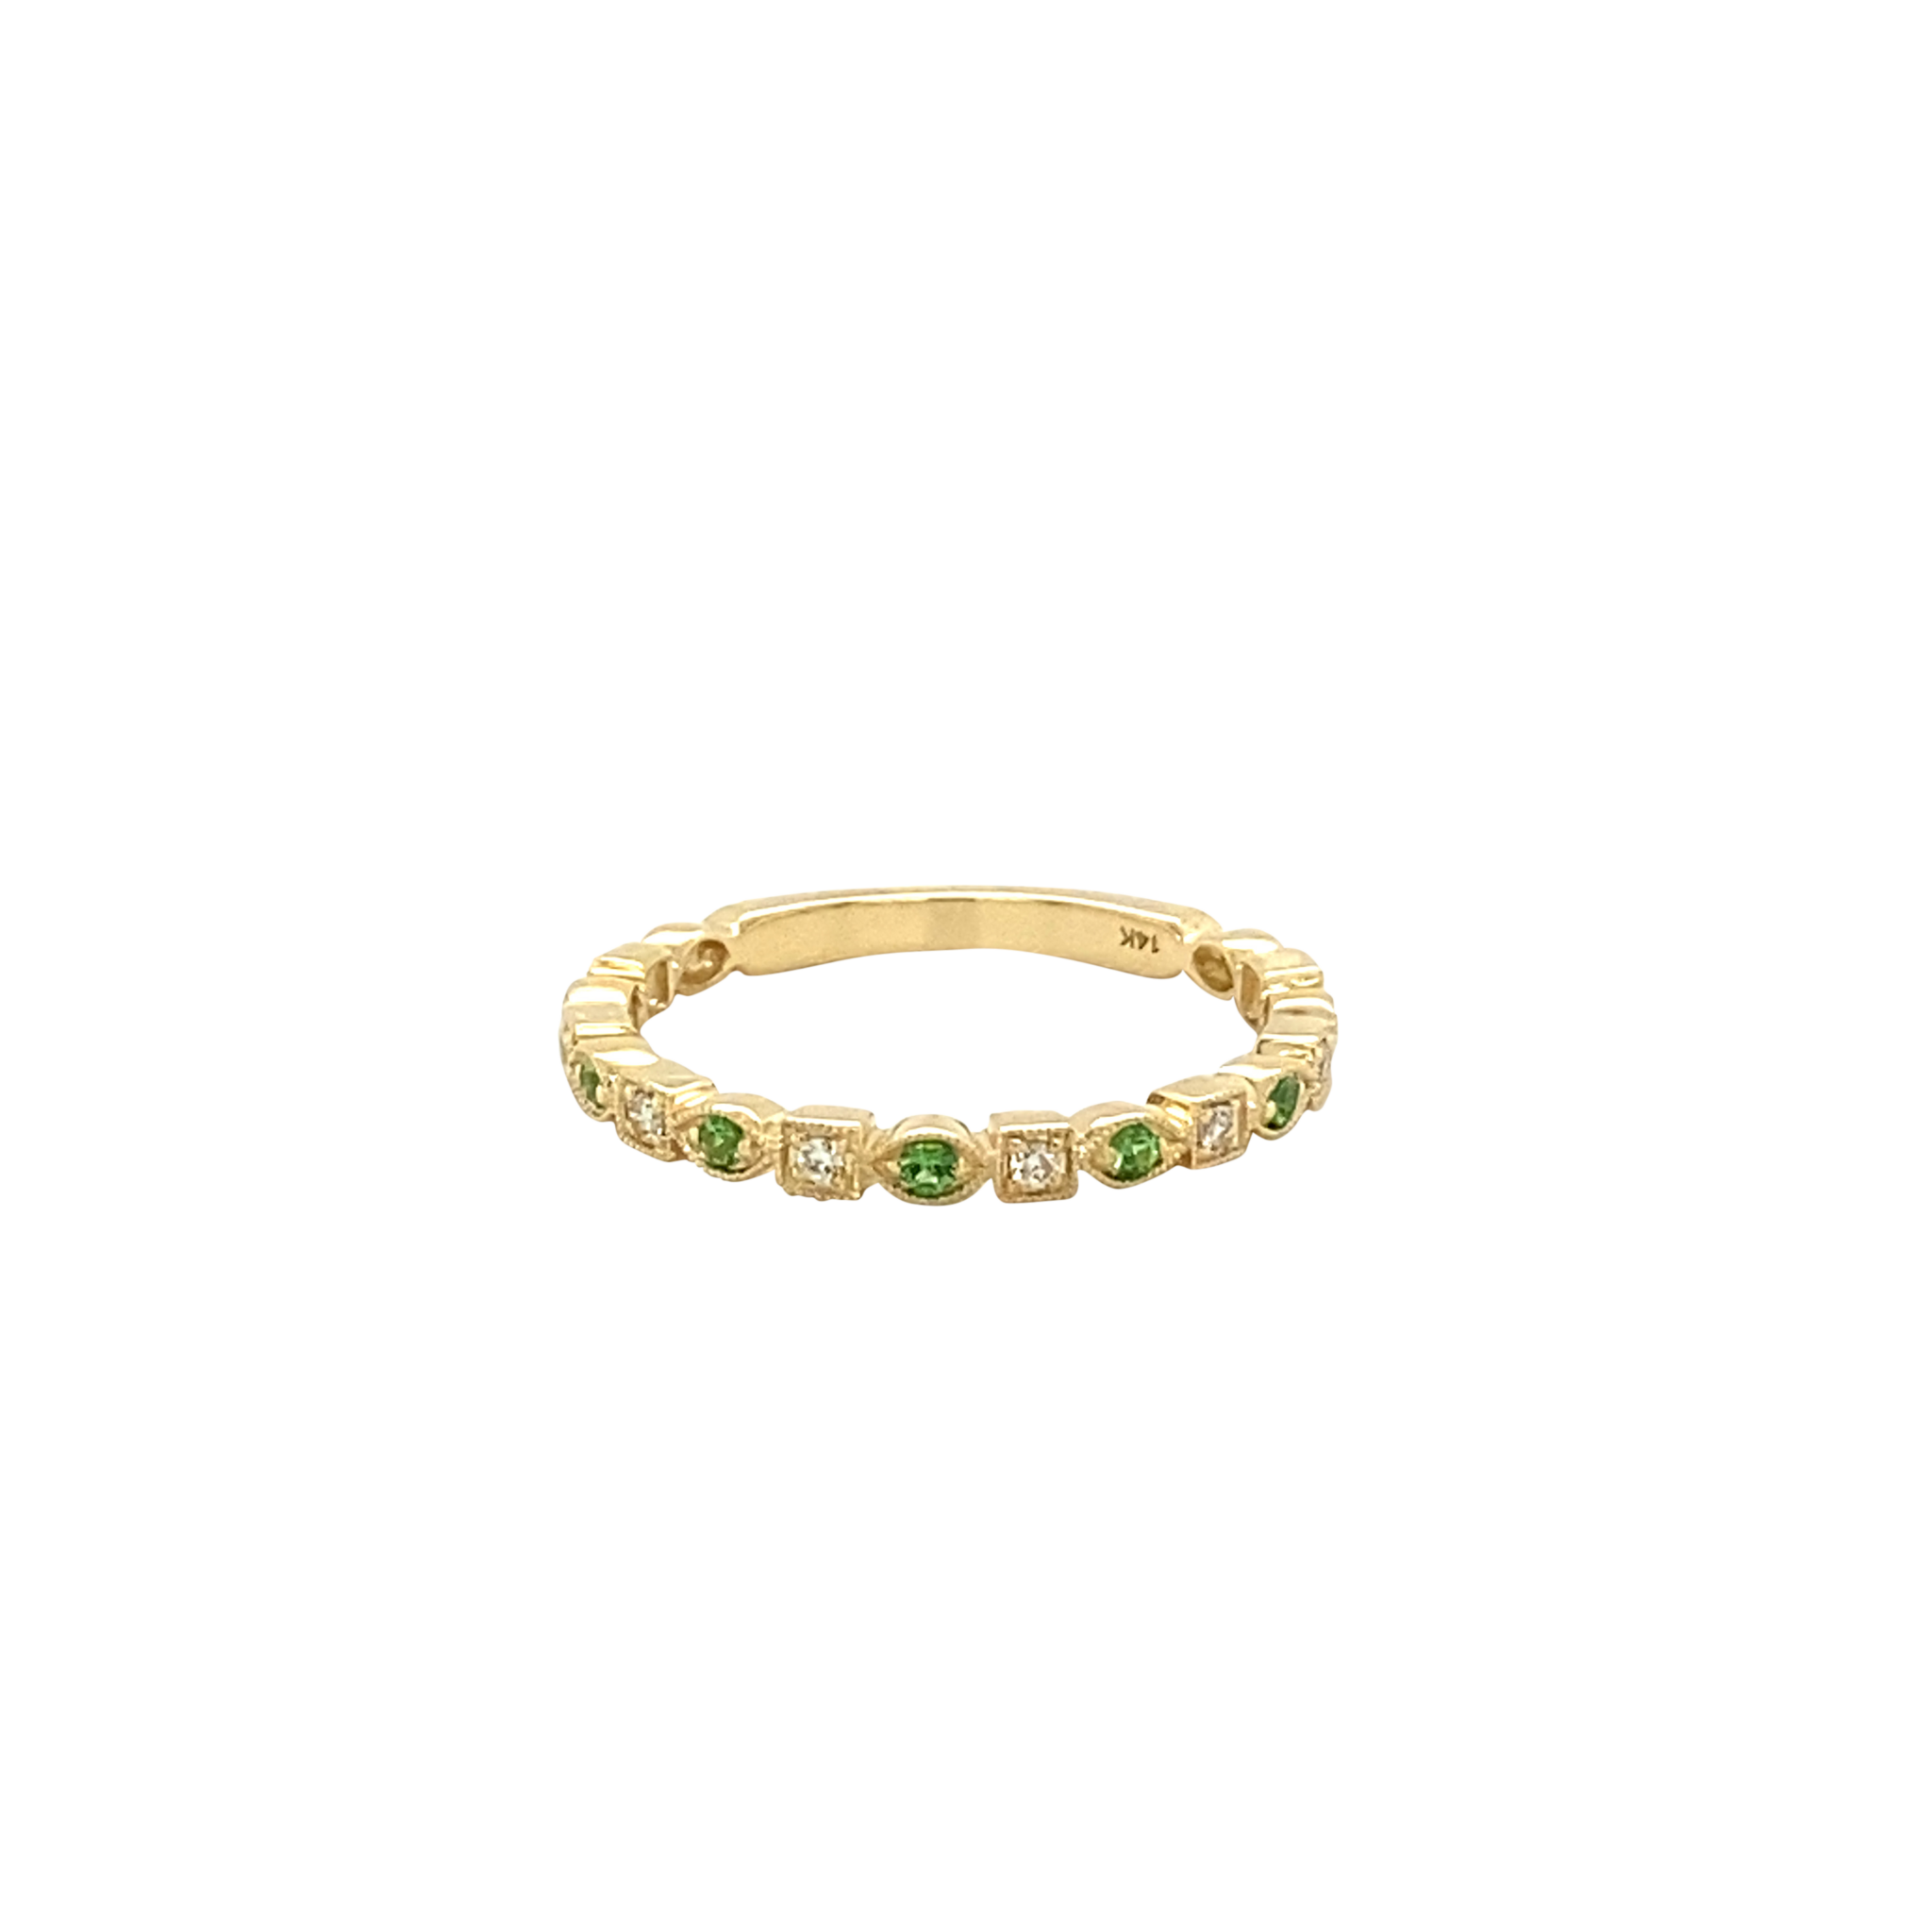 Emerald Diamond Stackable Ring - Vardy's Jewelers Bay Area